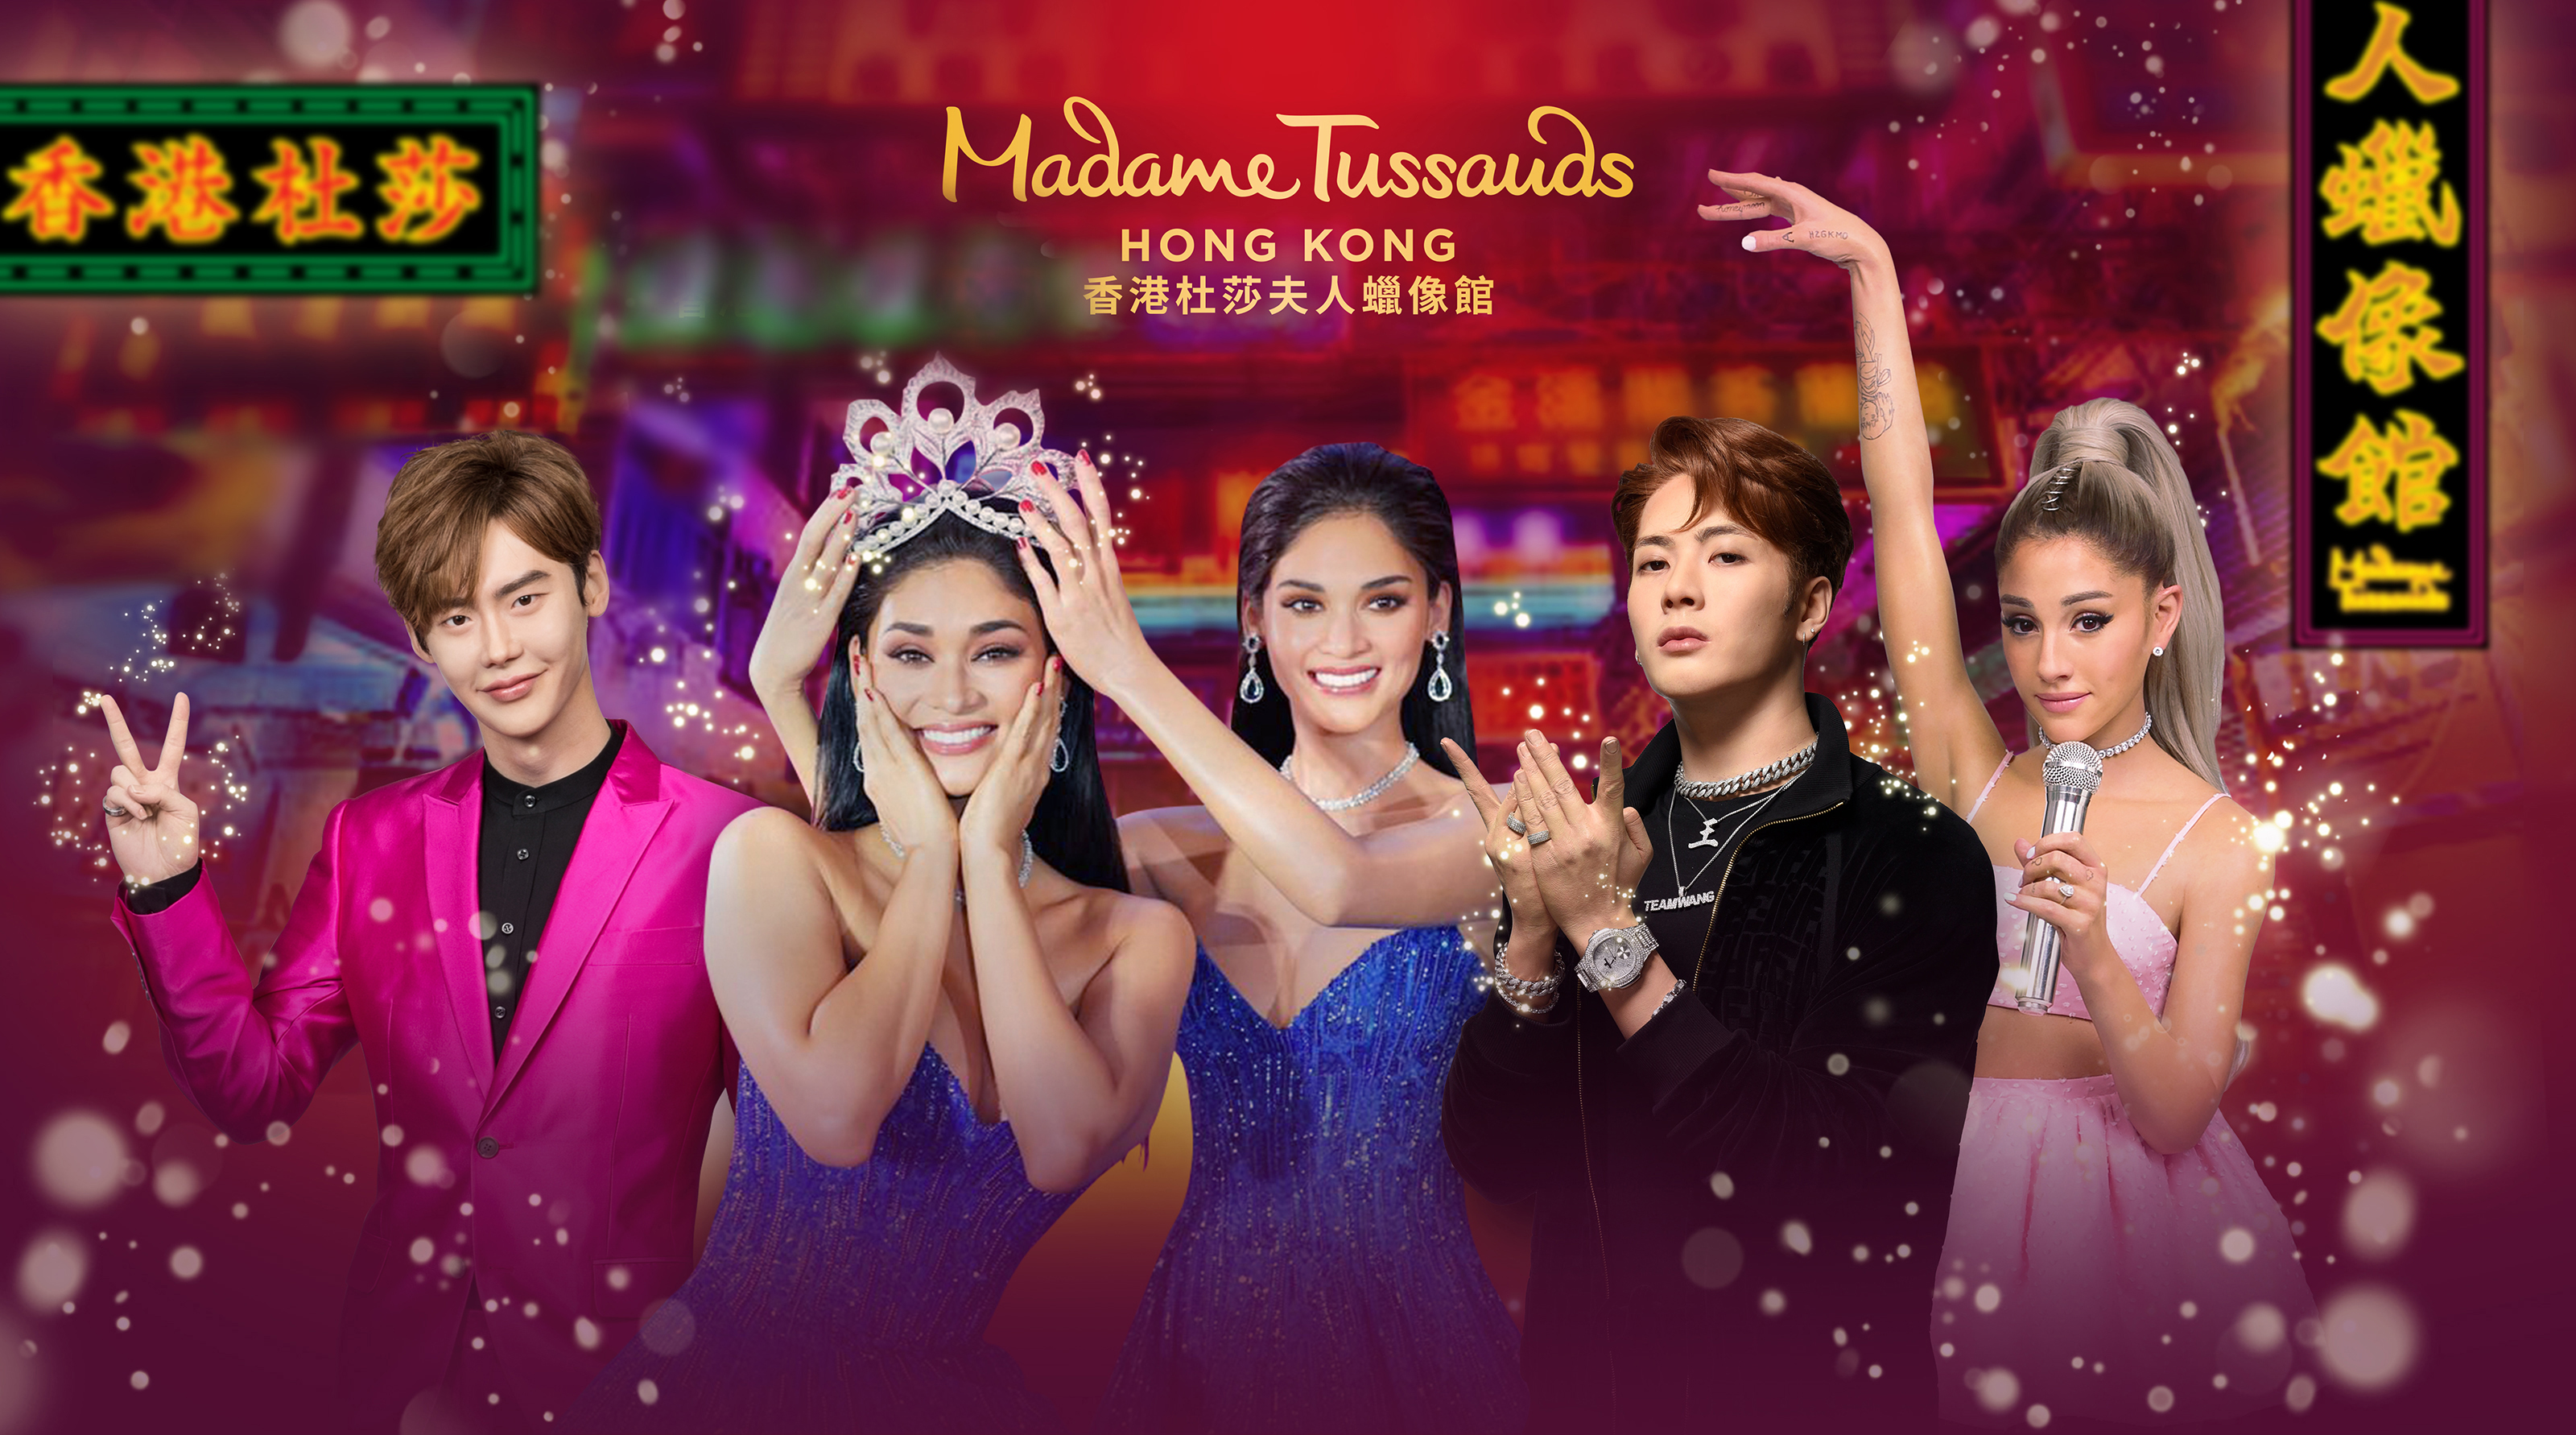 Have a star-studded journey at Madame Tussauds Hong Kong! Meet Pia Wurtbach, Jackson Wang, Ariana Grande, and more of your favourite celebrities.